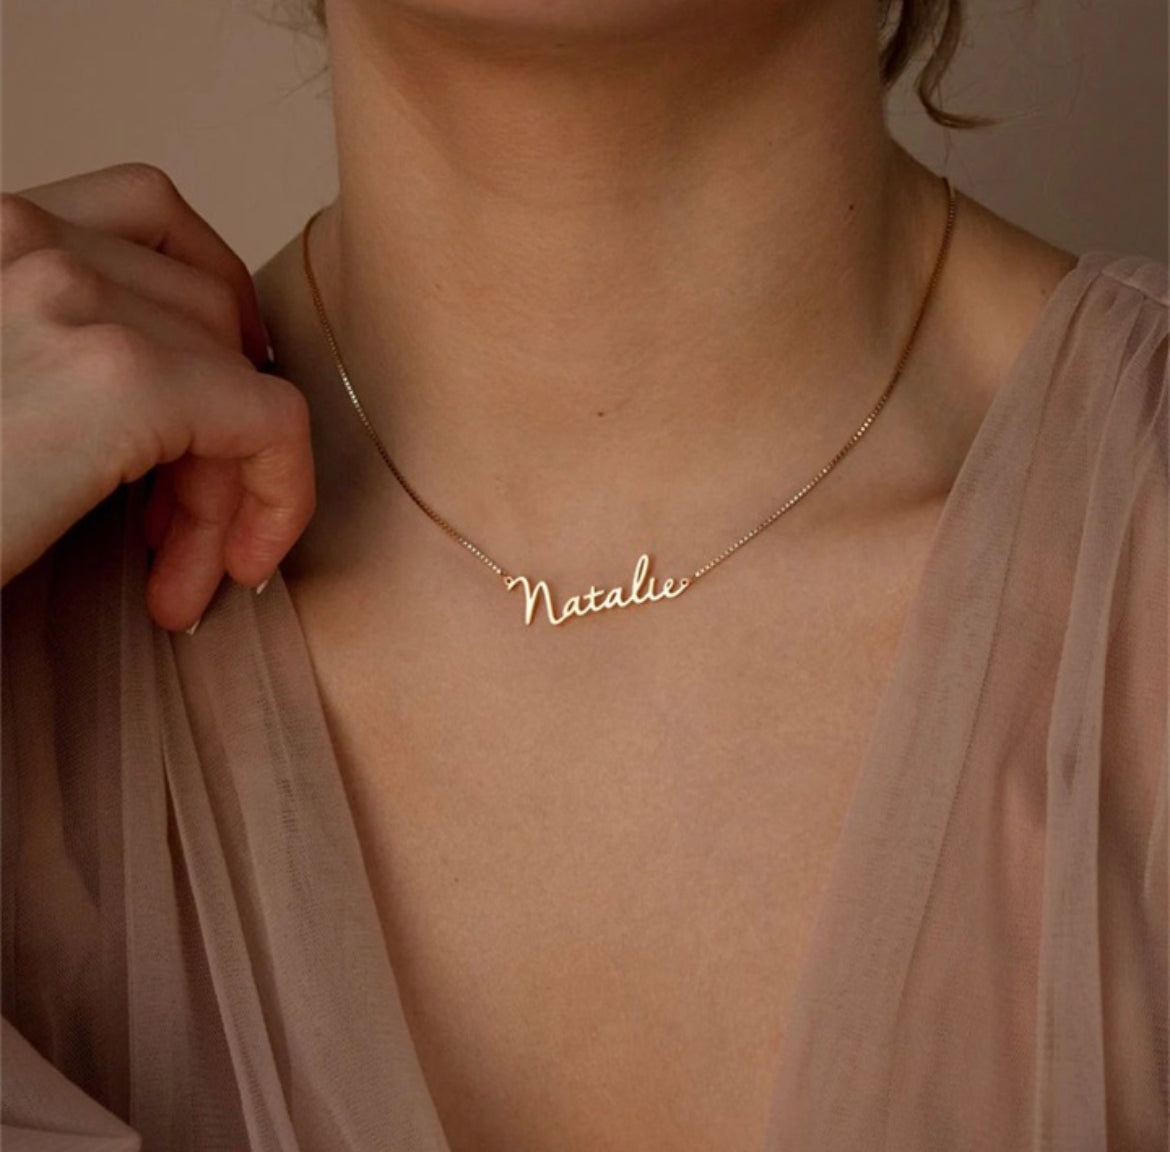 Personalized Name Necklace by Minimalist Labs